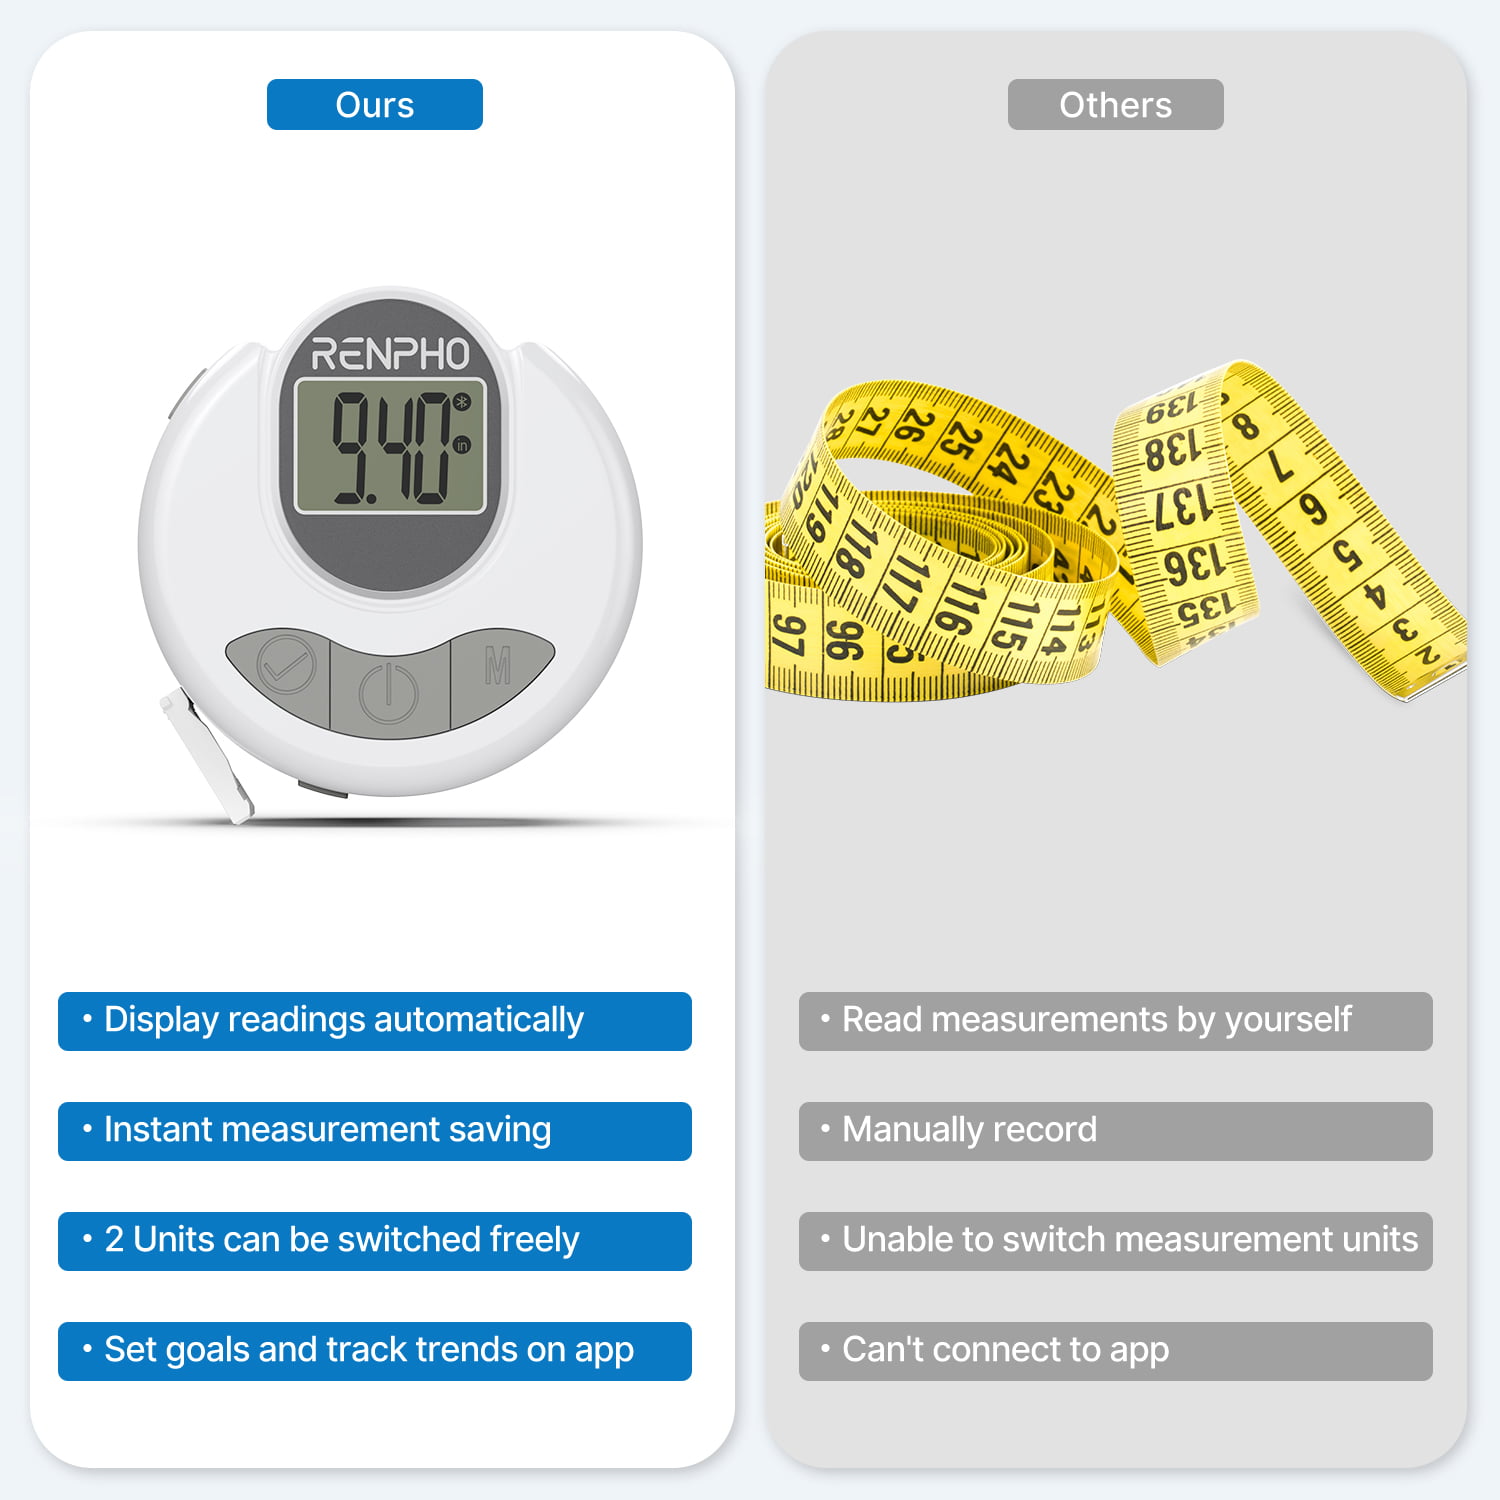 RENPHO Smart Tape Measure with App, Small Bluetooth Measuring Tape with LCD Display for Monitoring Body Circumference, Tailors, Pregnant, White